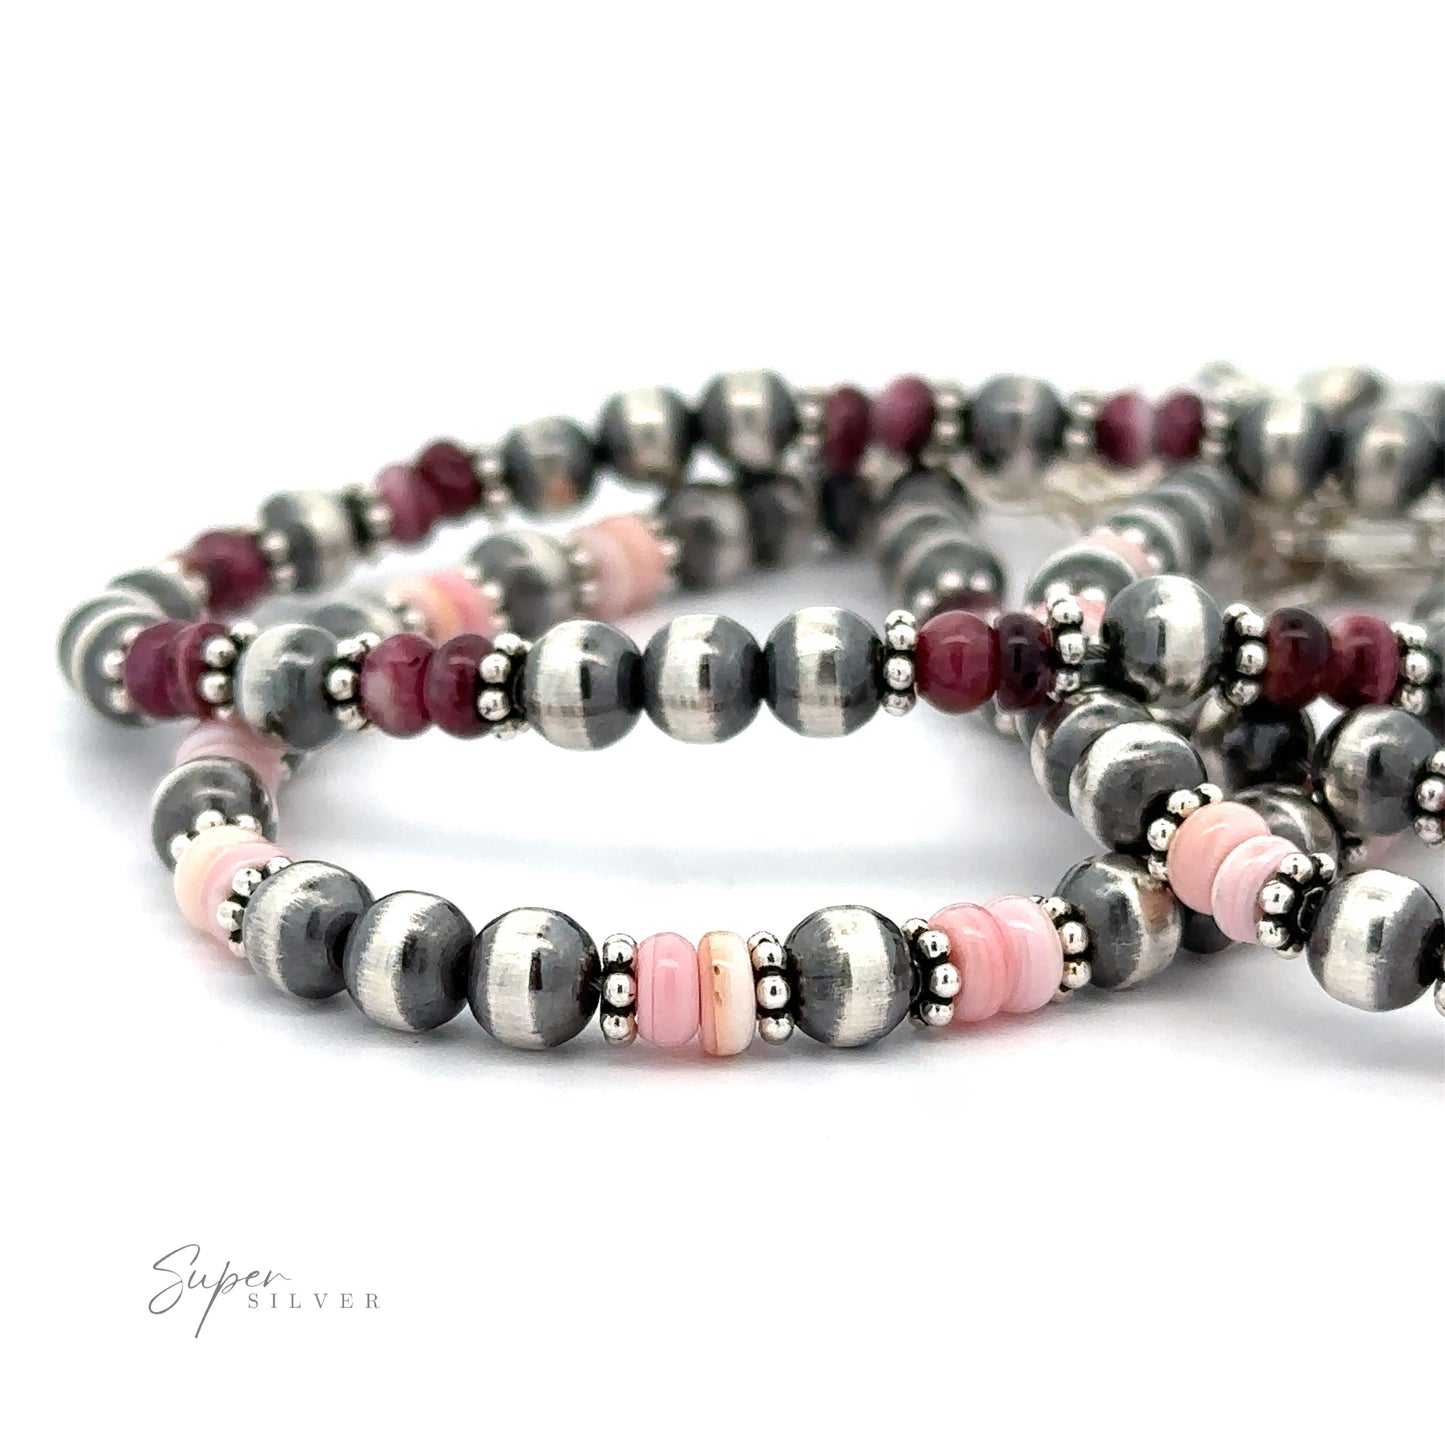 A close-up of three Native American Shell and Navajo Pearl Bracelets featuring pink and metallic gray beads with a signature in the corner.